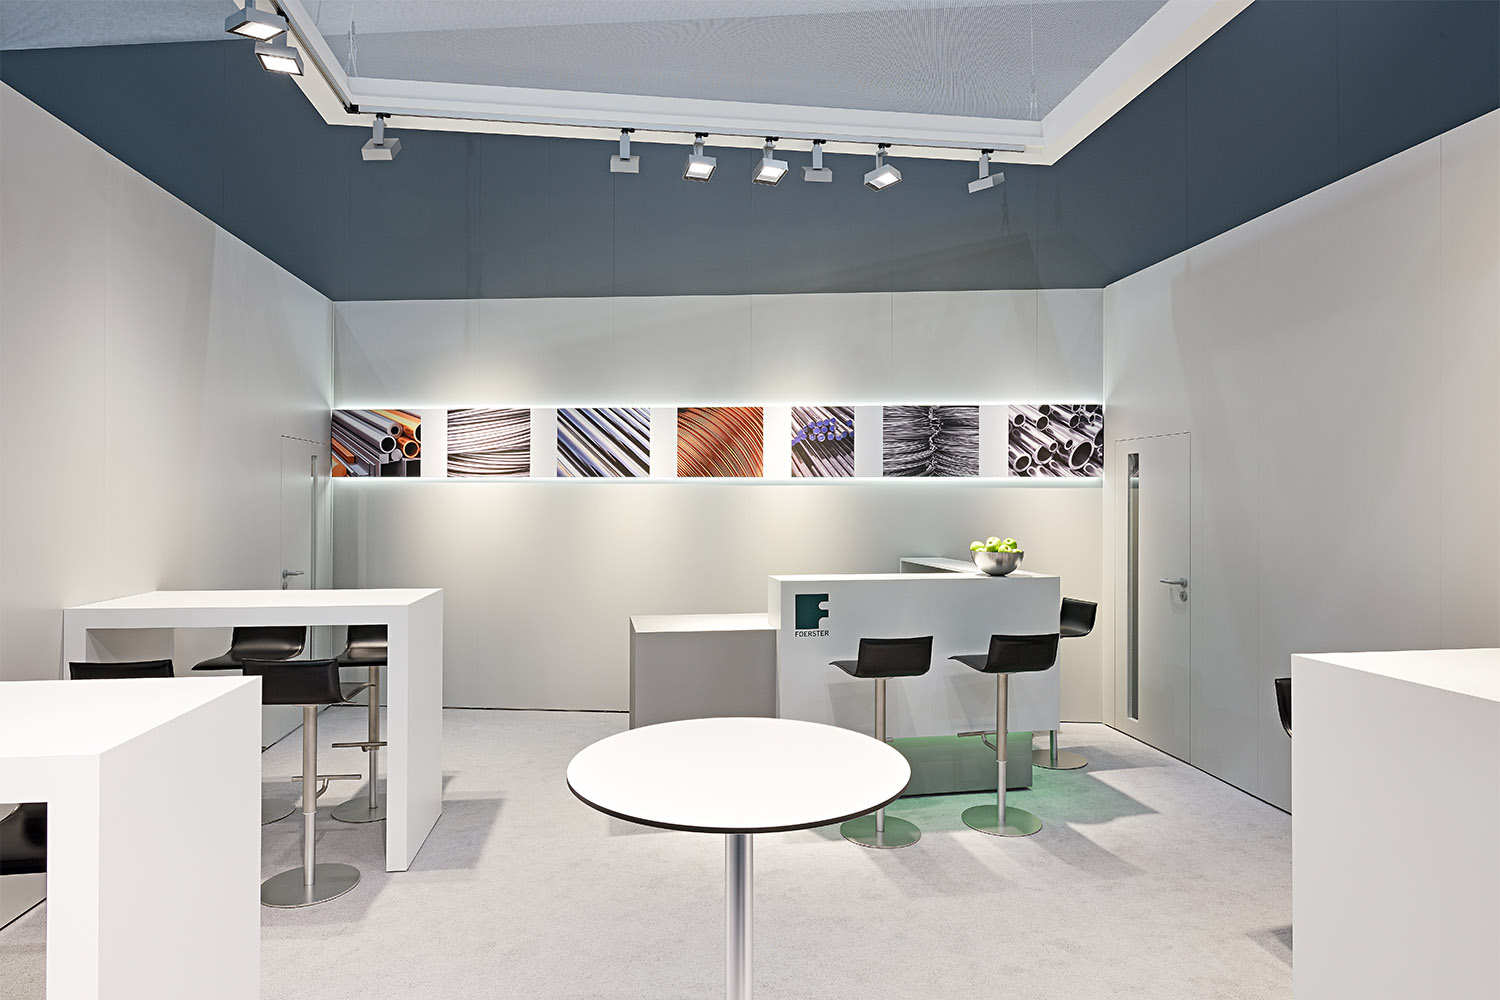 Foerster exhibition stand